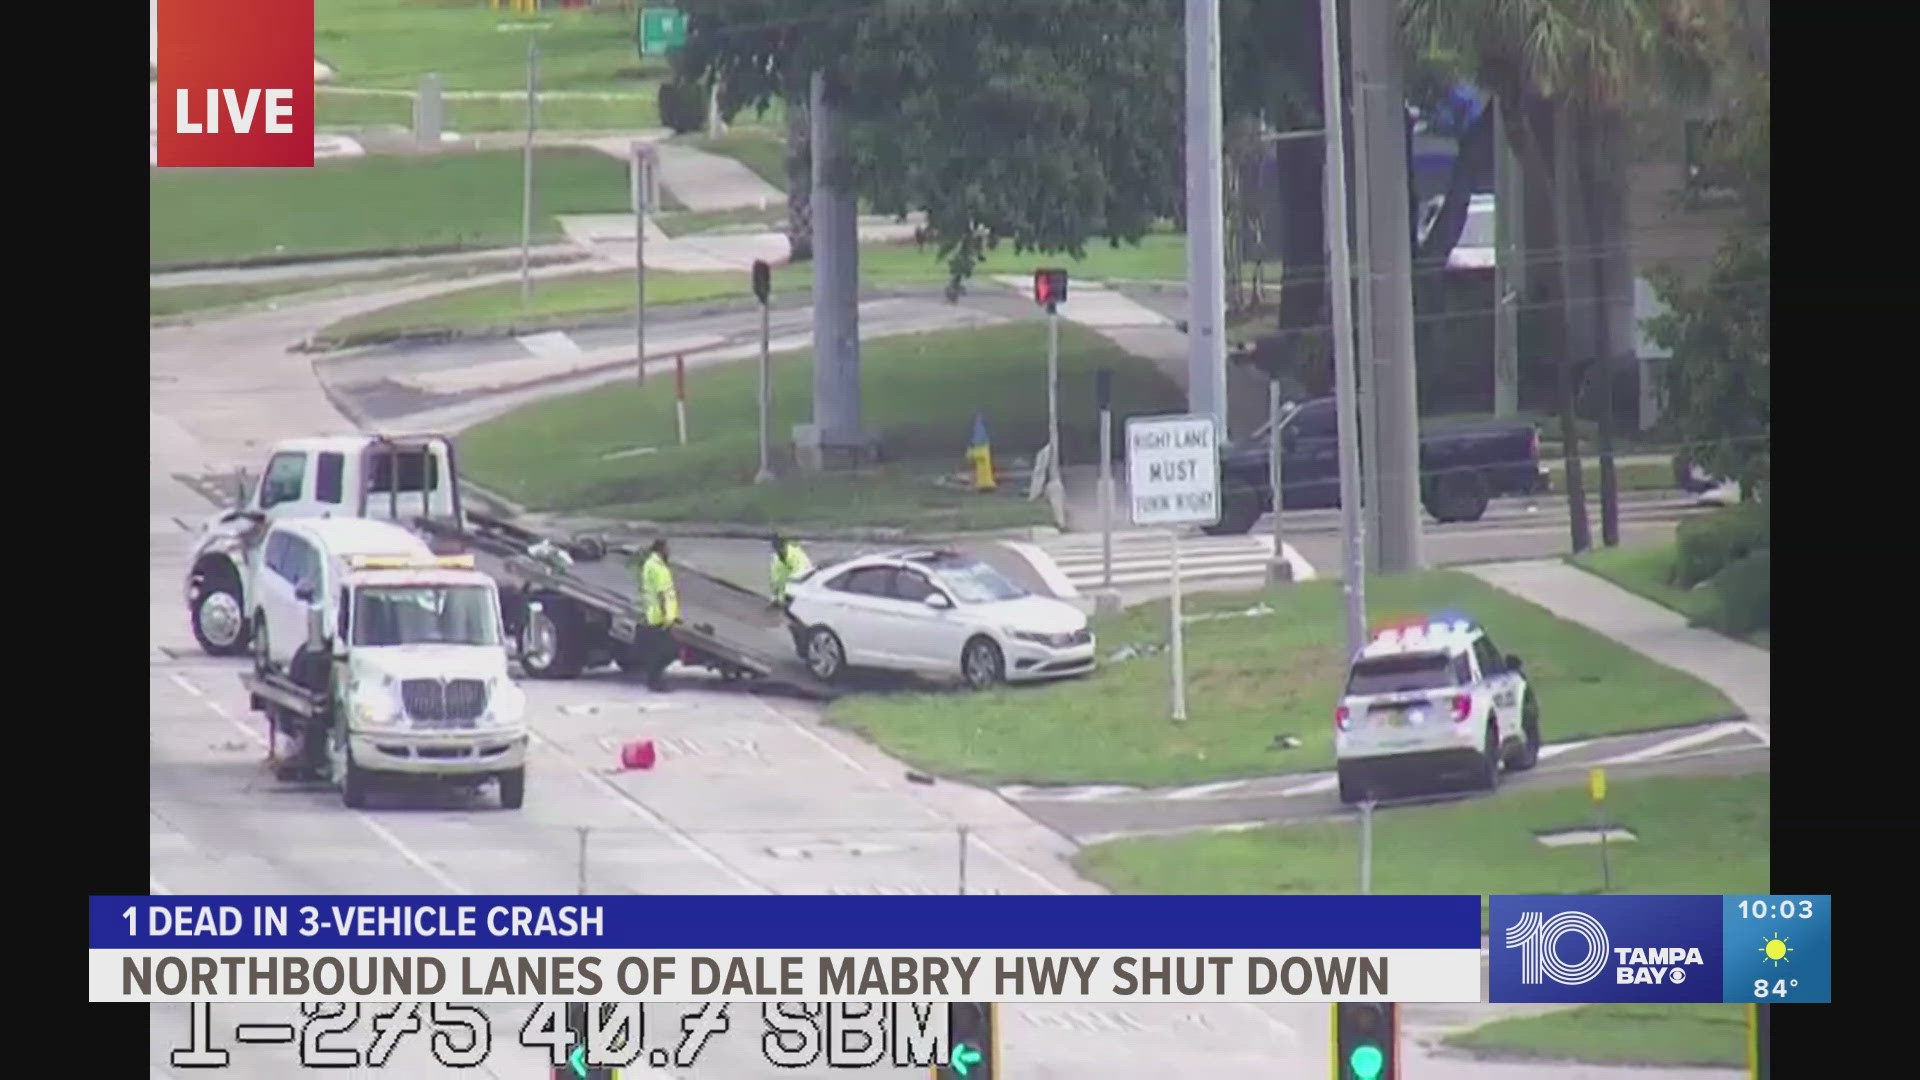 Parts of Dale Mabry were closed but have since reopened. Traffic cameras showed the deadly scene with a car flipped over.